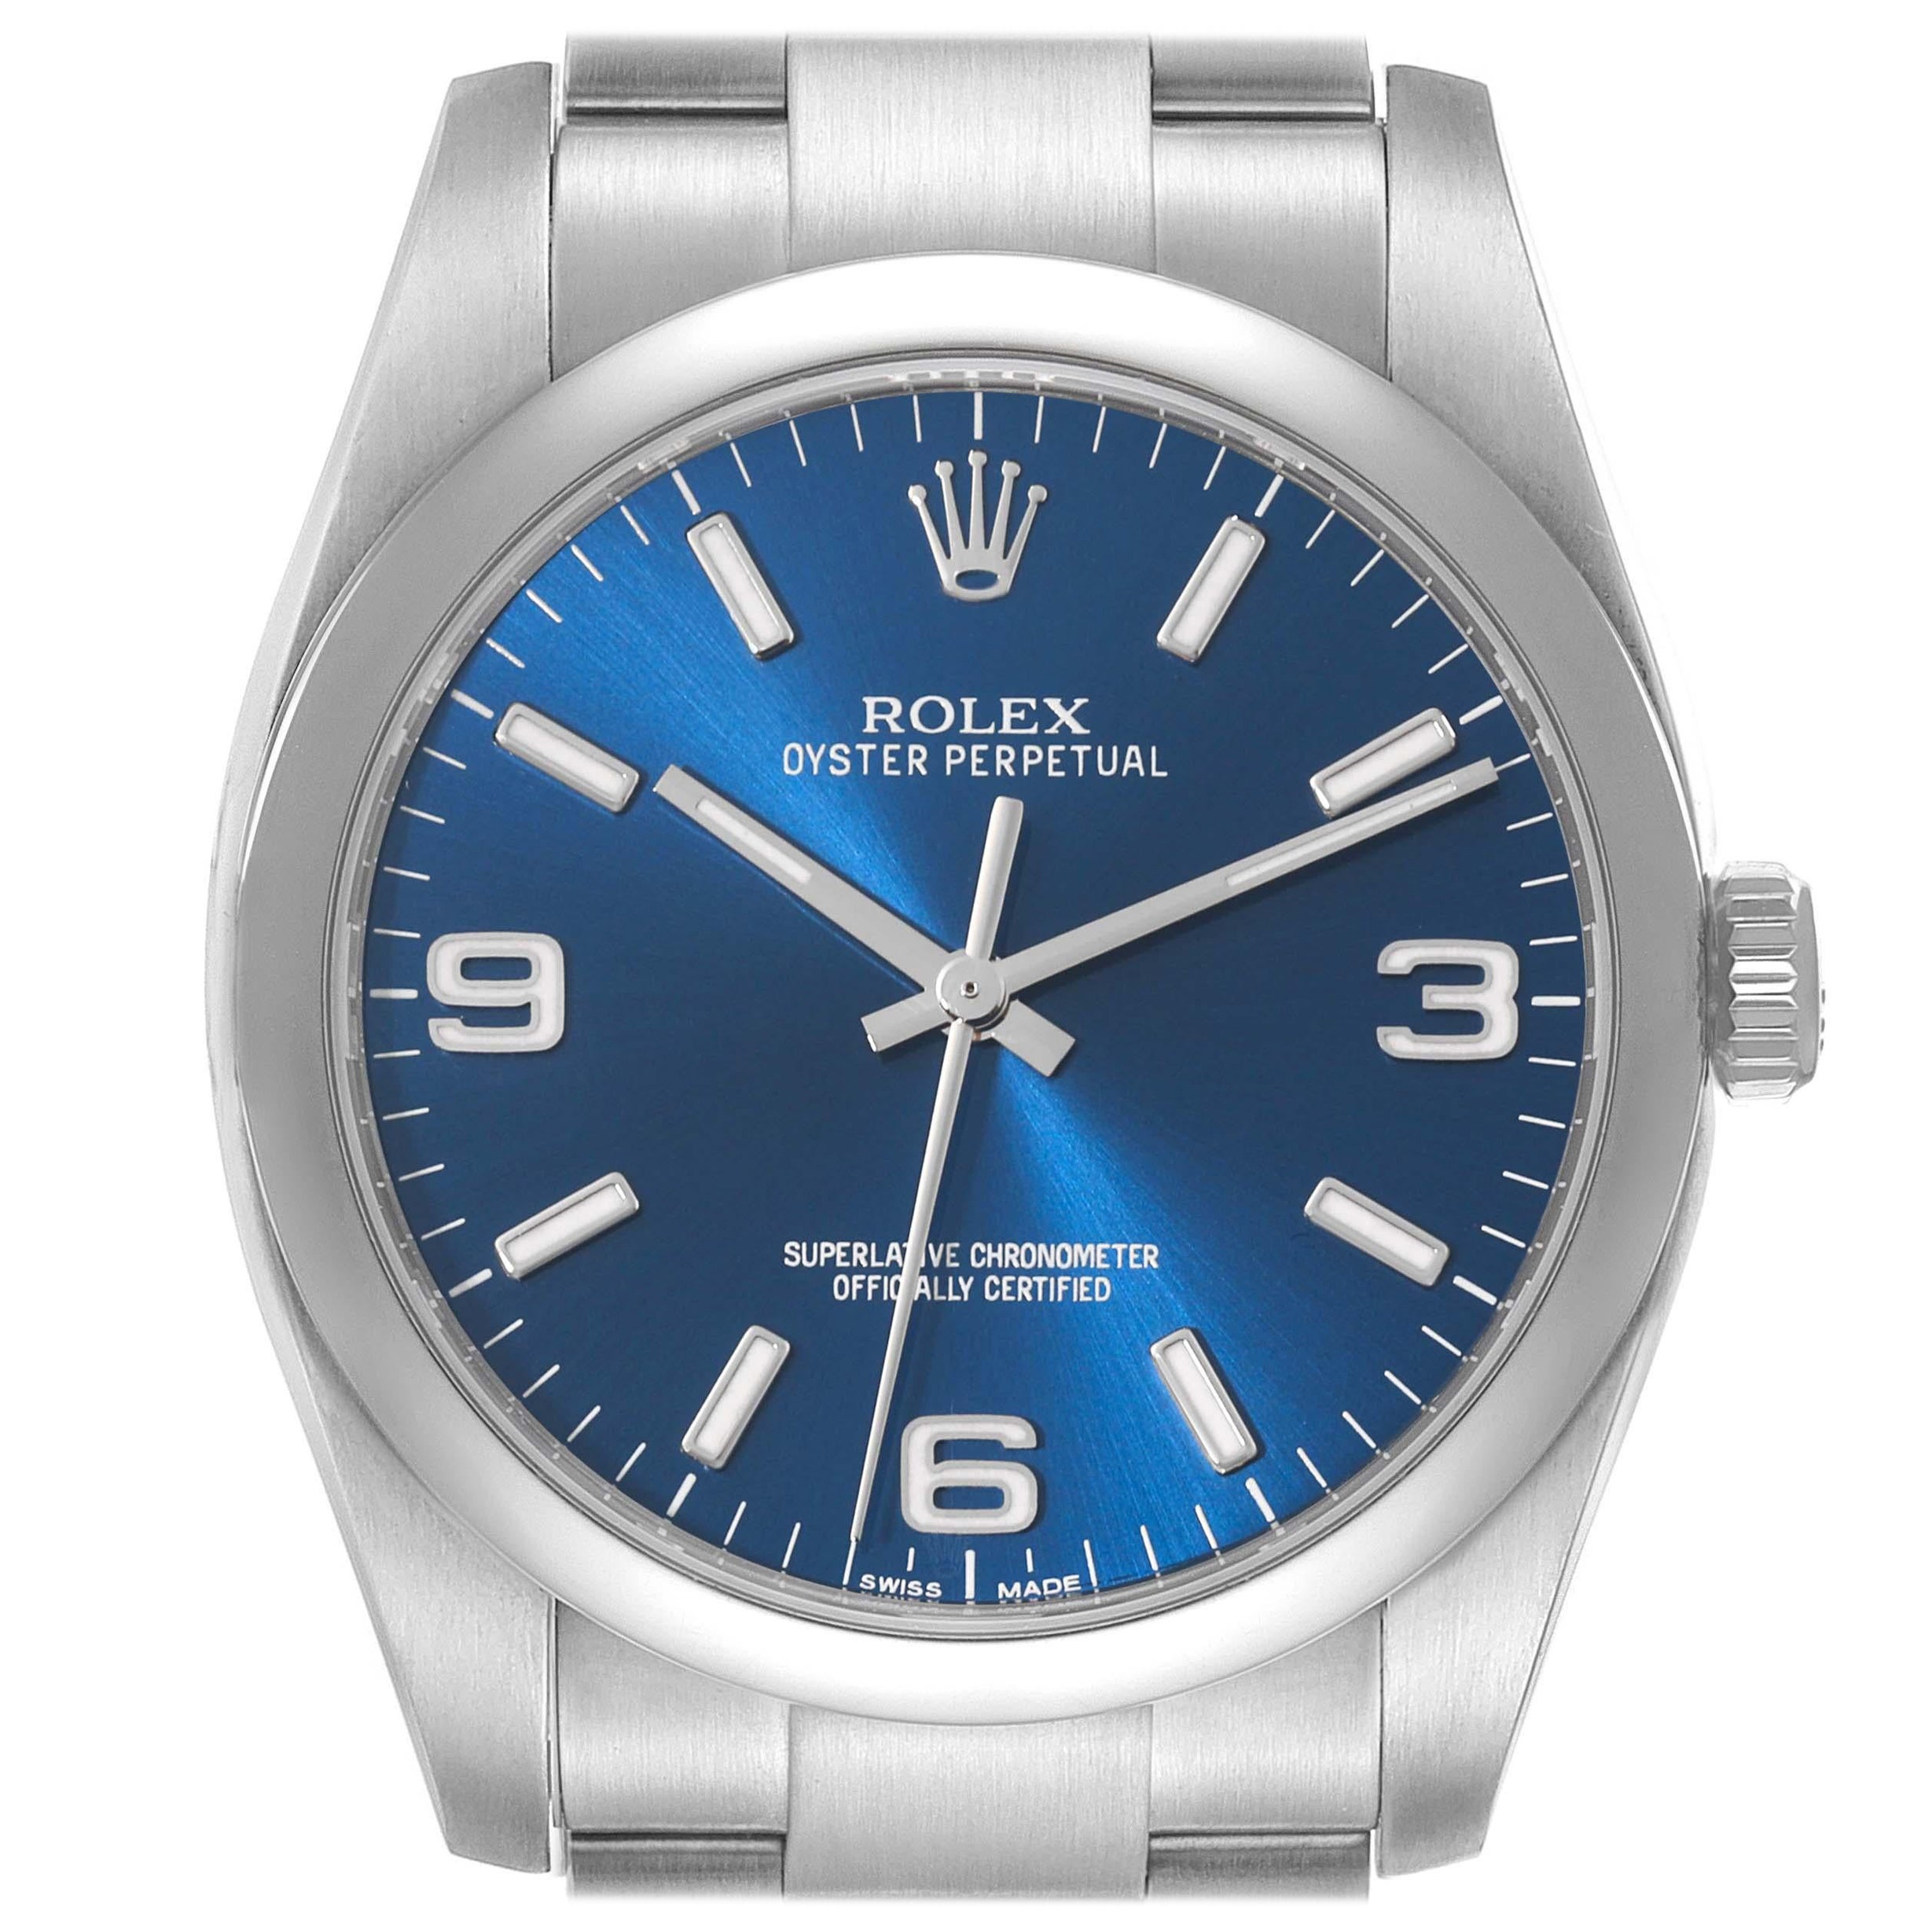 Rolex Oyster Perpetual 36mm Blue Dial Steel Mens Watch 116000